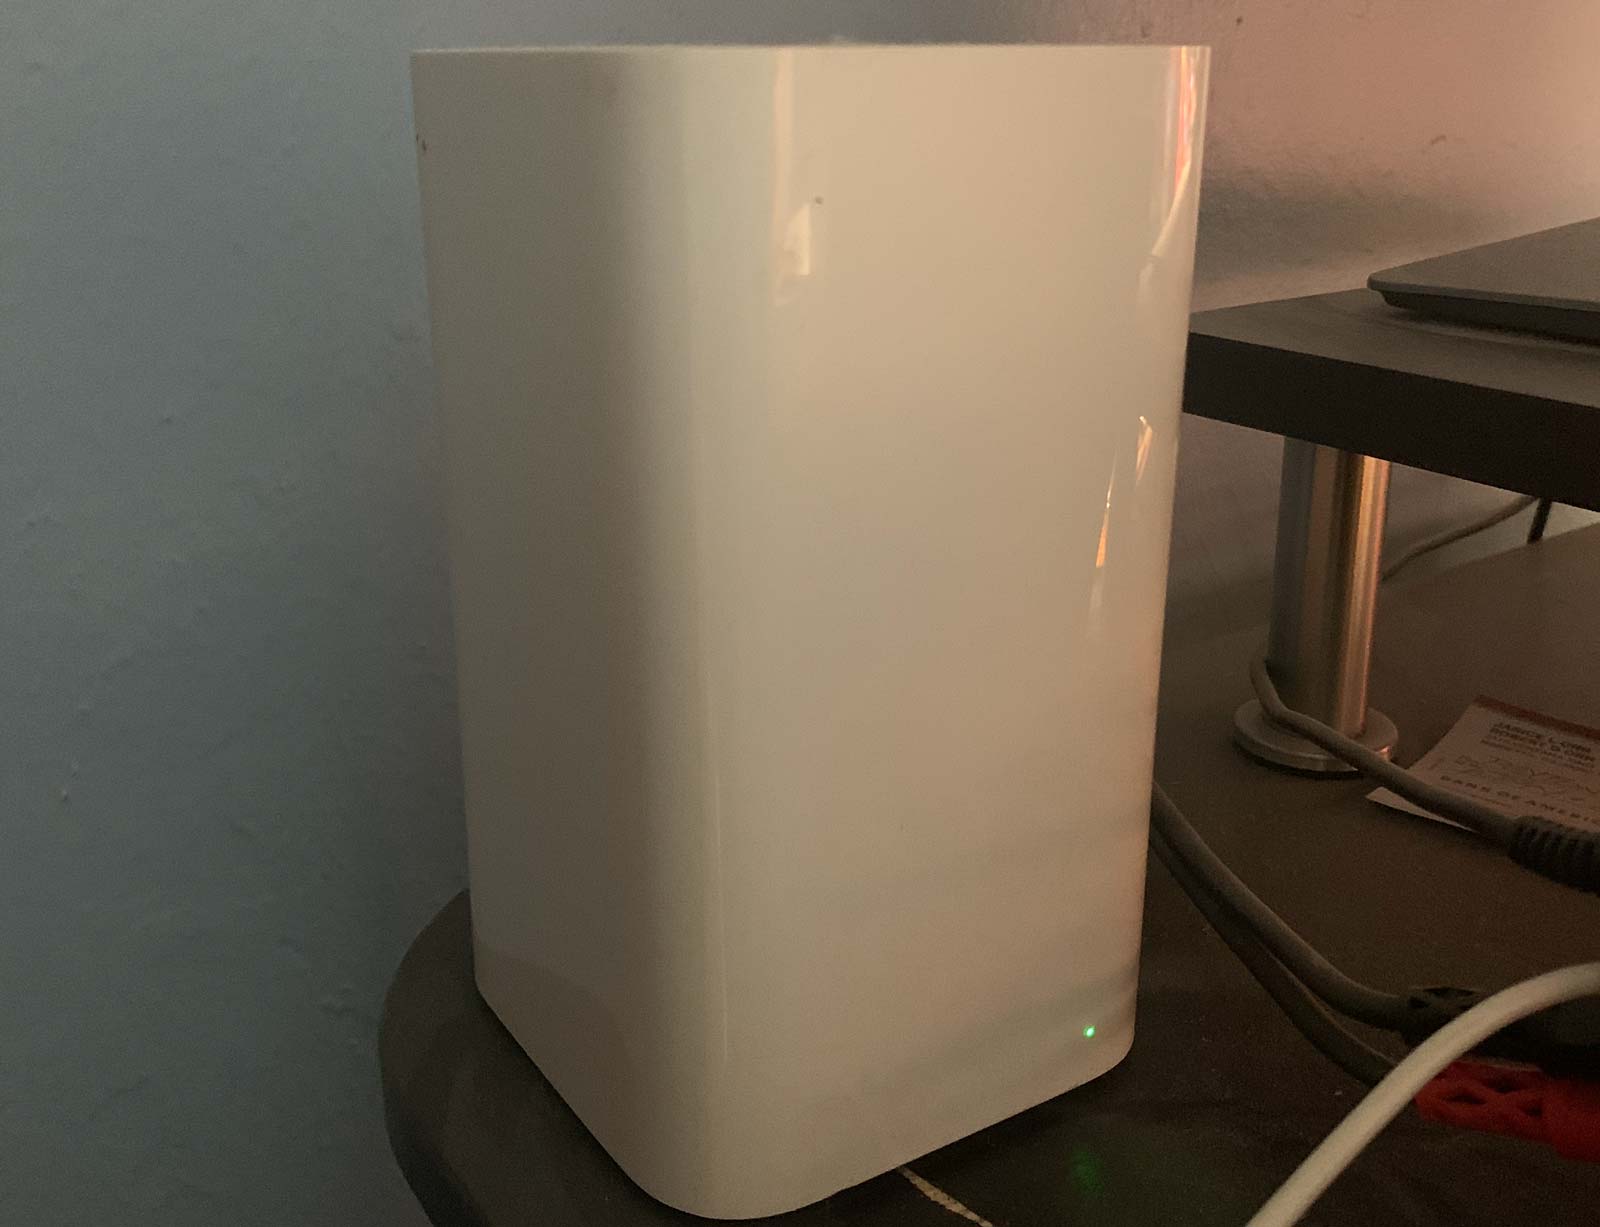 Apple Airport Base Station with on-board storage